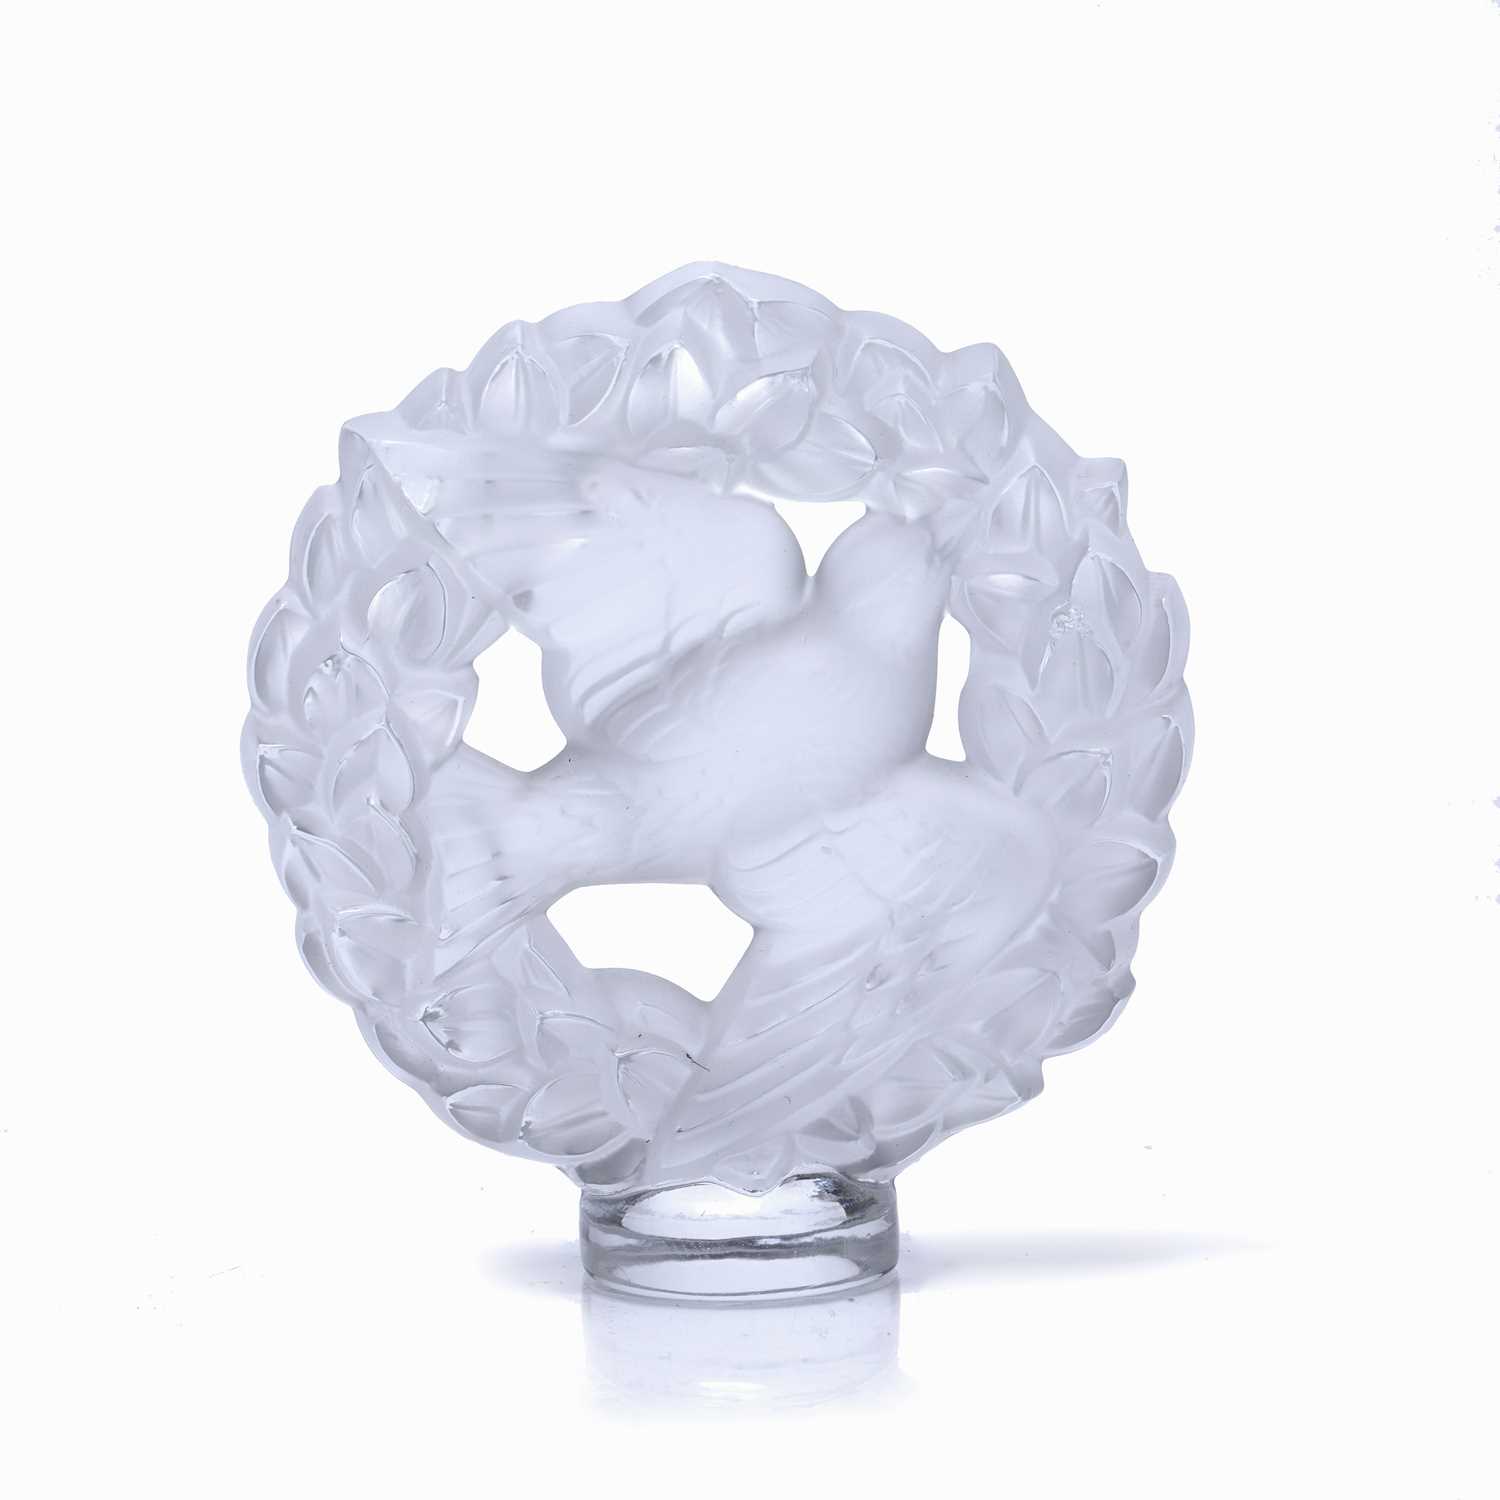 René Lalique (1860-1945) 'Pax dove in wreath' glass paperweight, signed 'Lalique France' to the